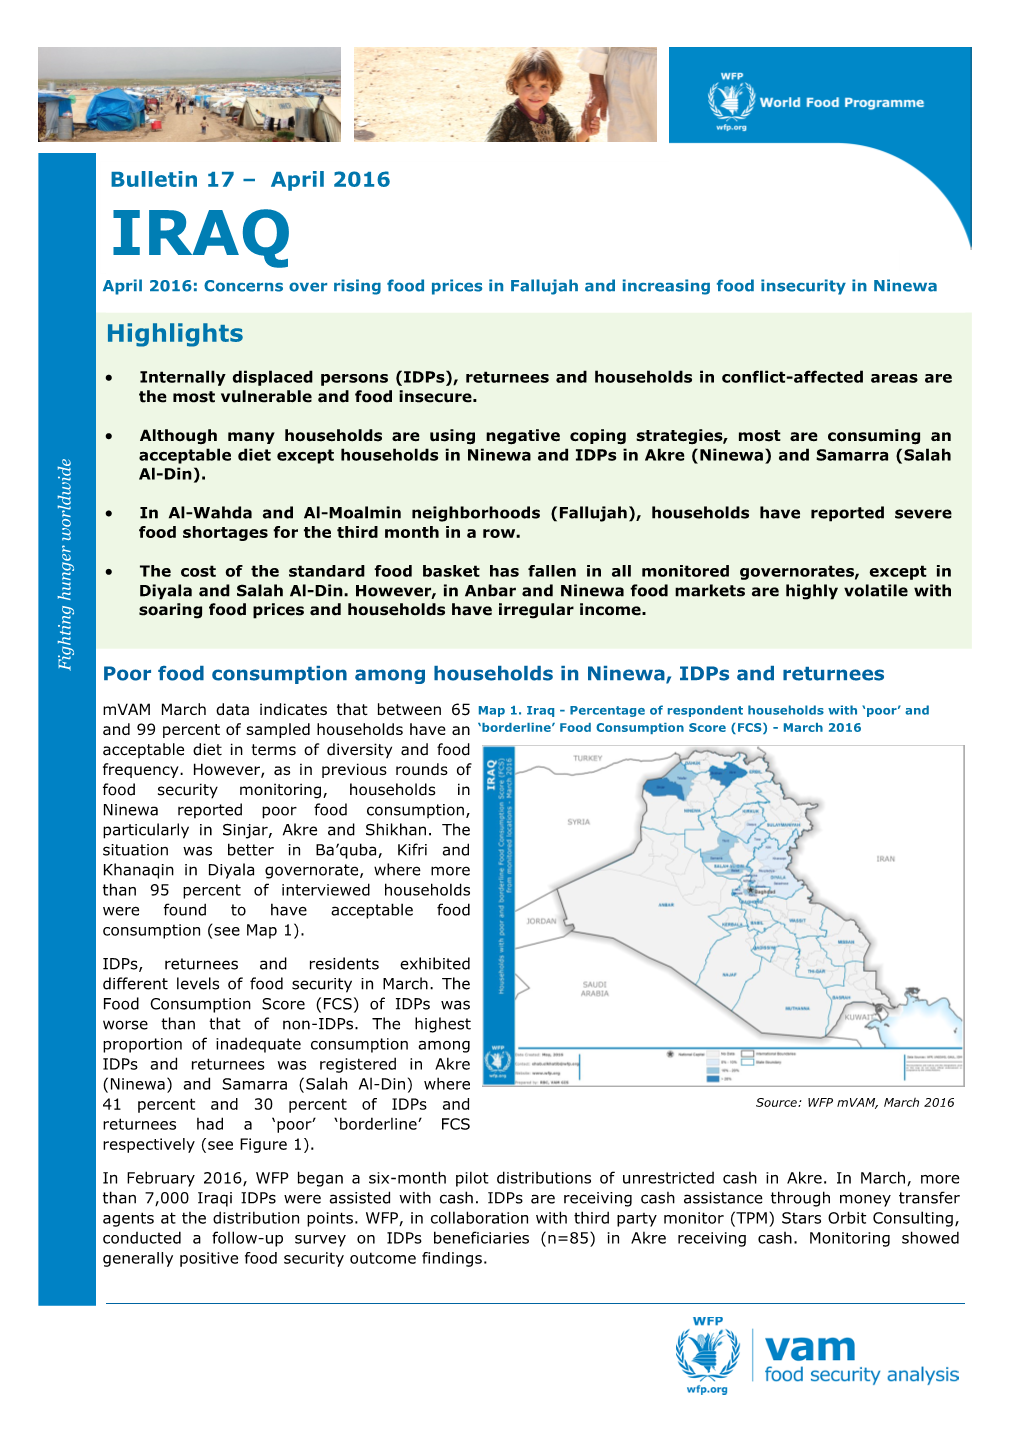 Concerns Over Rising Food Prices in Fallujah and Increasing Food